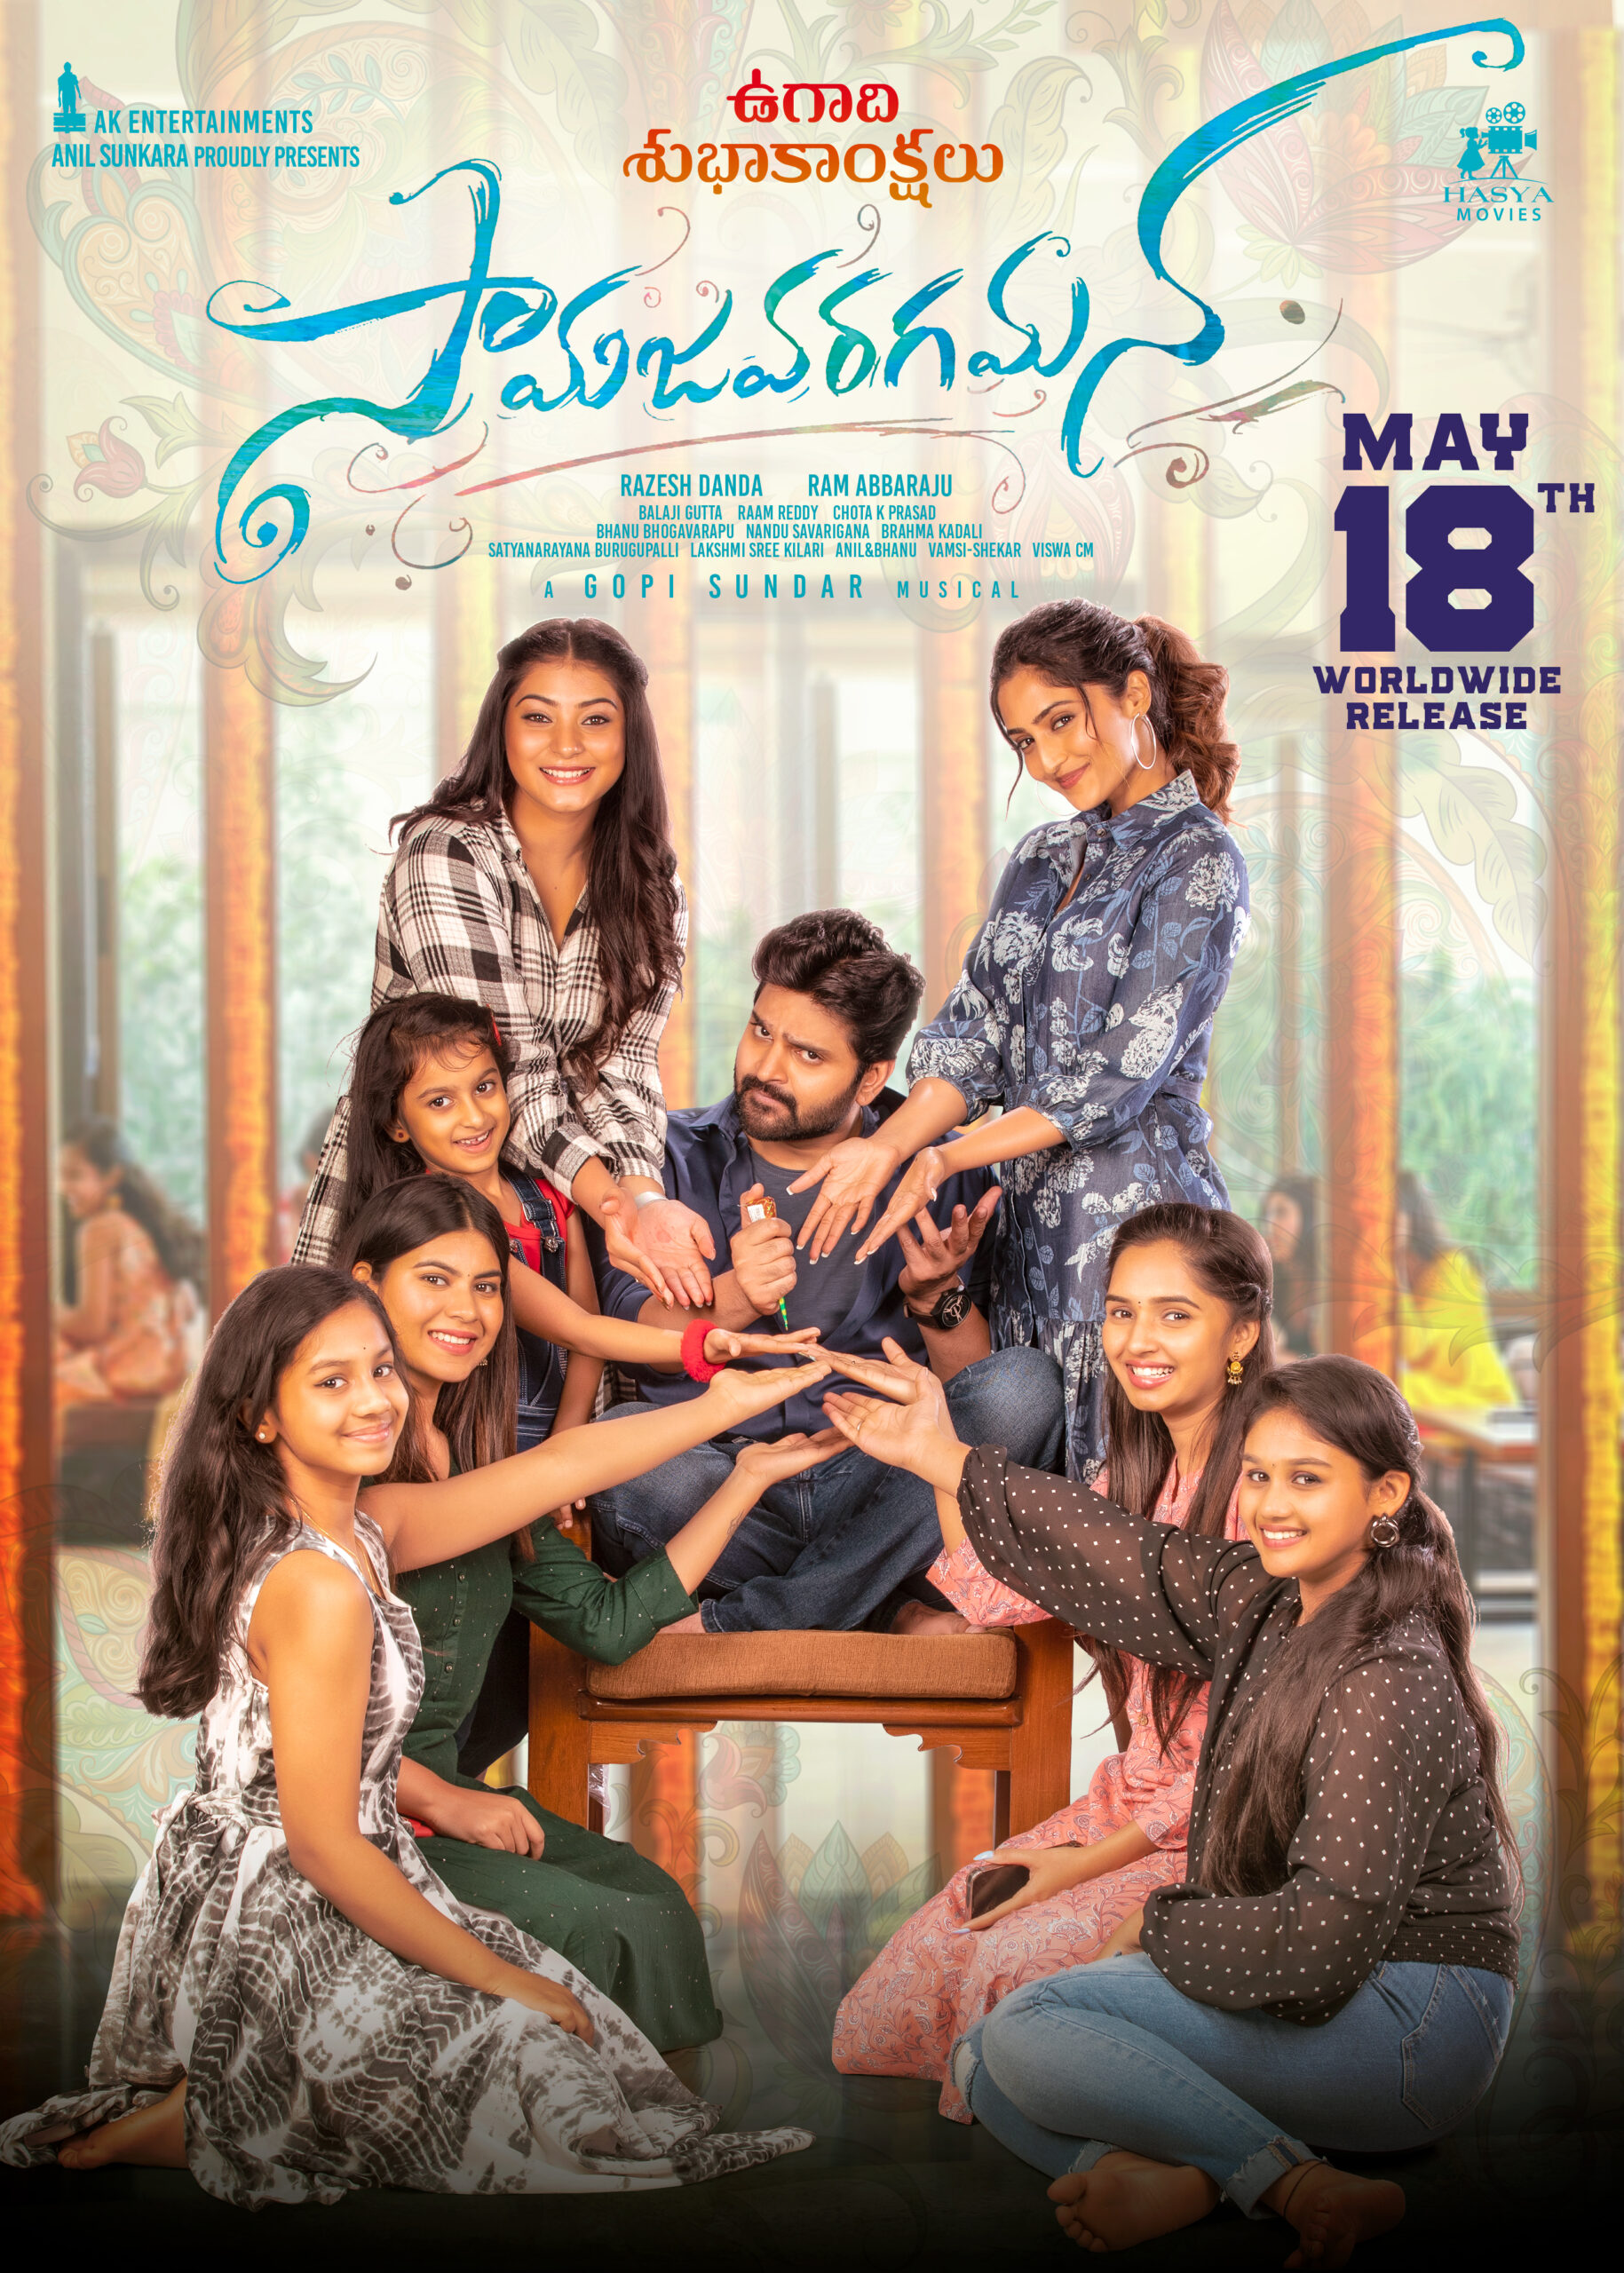 . The announcement poster looks very pleasant. Sree Vishnu can be seen along with all the ladies in the family.